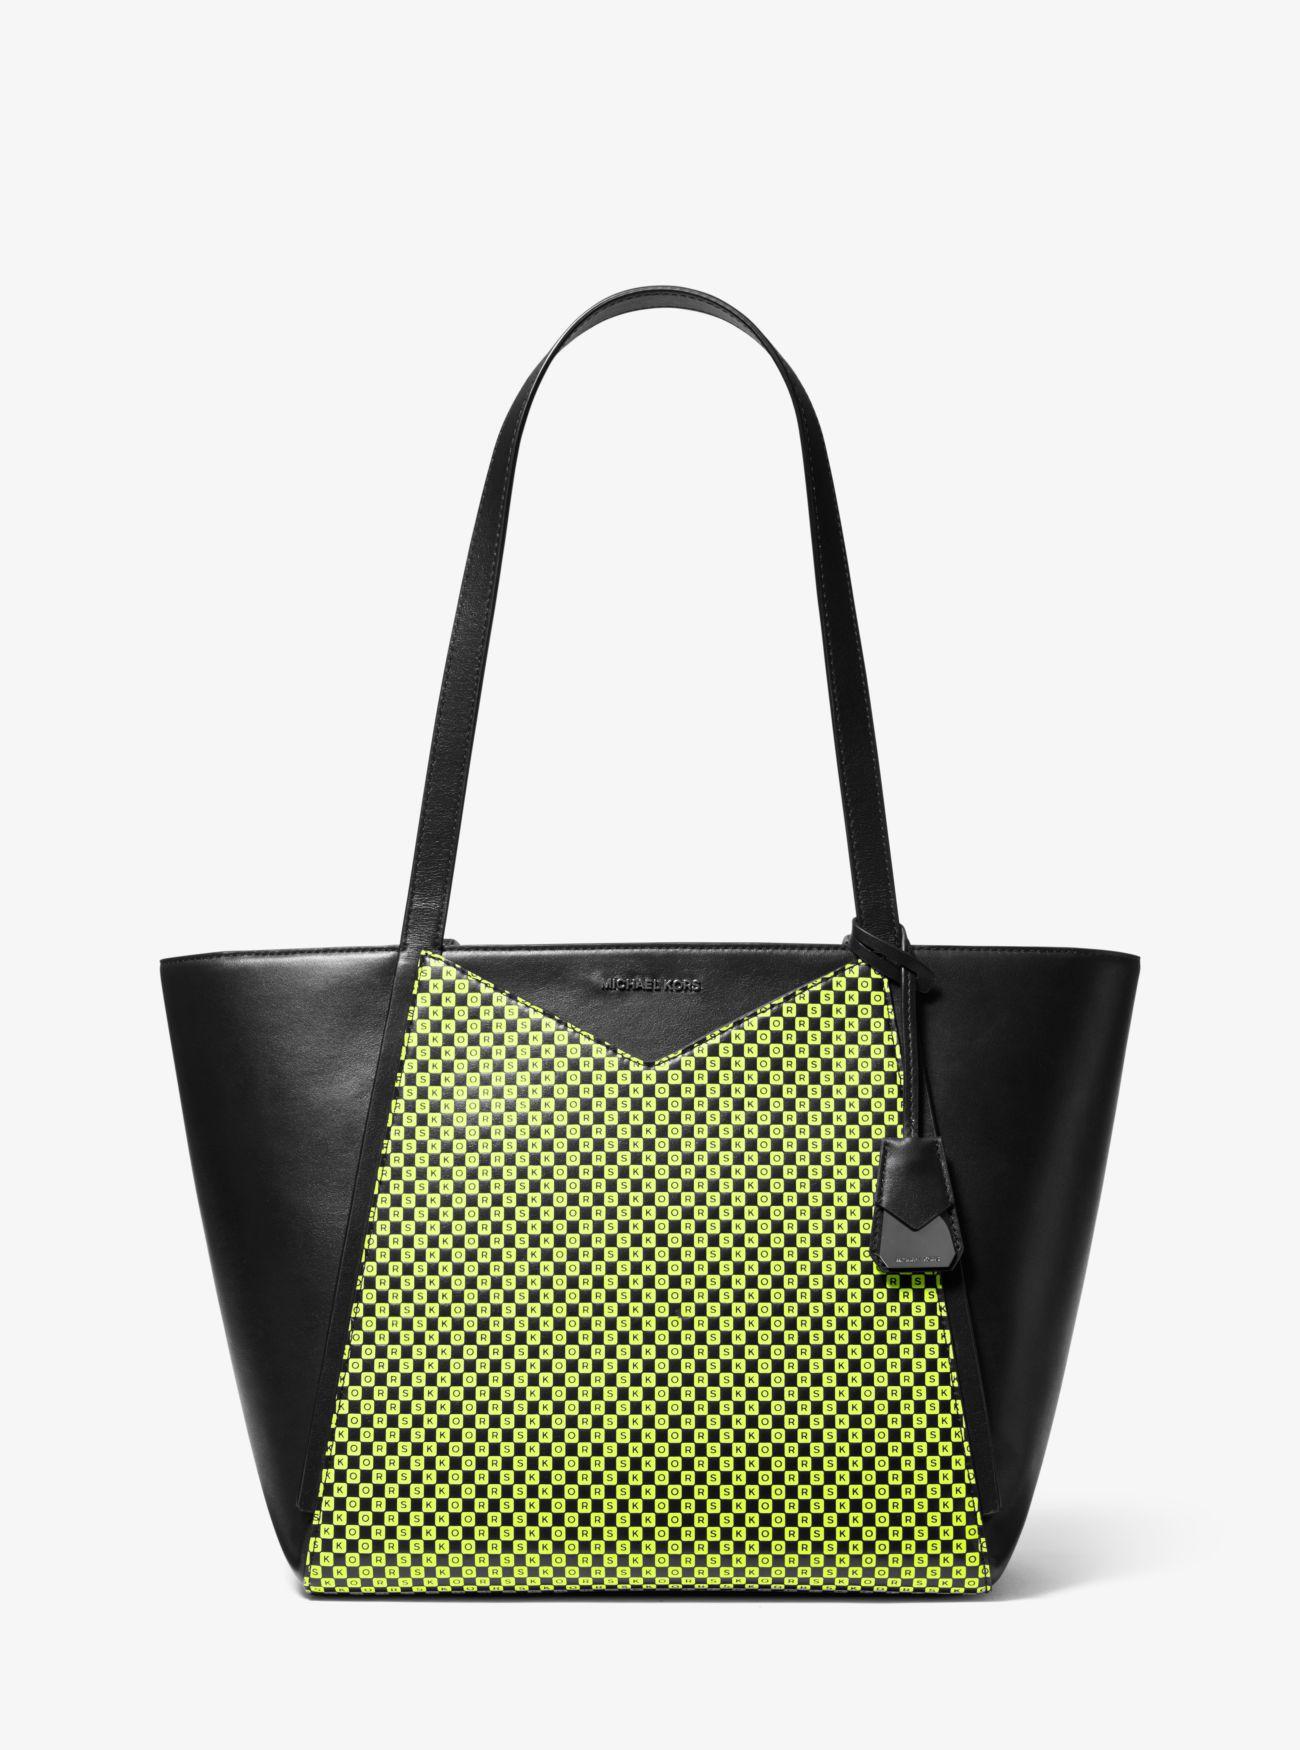 Michael Kors Whitney Large Checkerboard Logo Leather Tote Bag in Yellow - Lyst